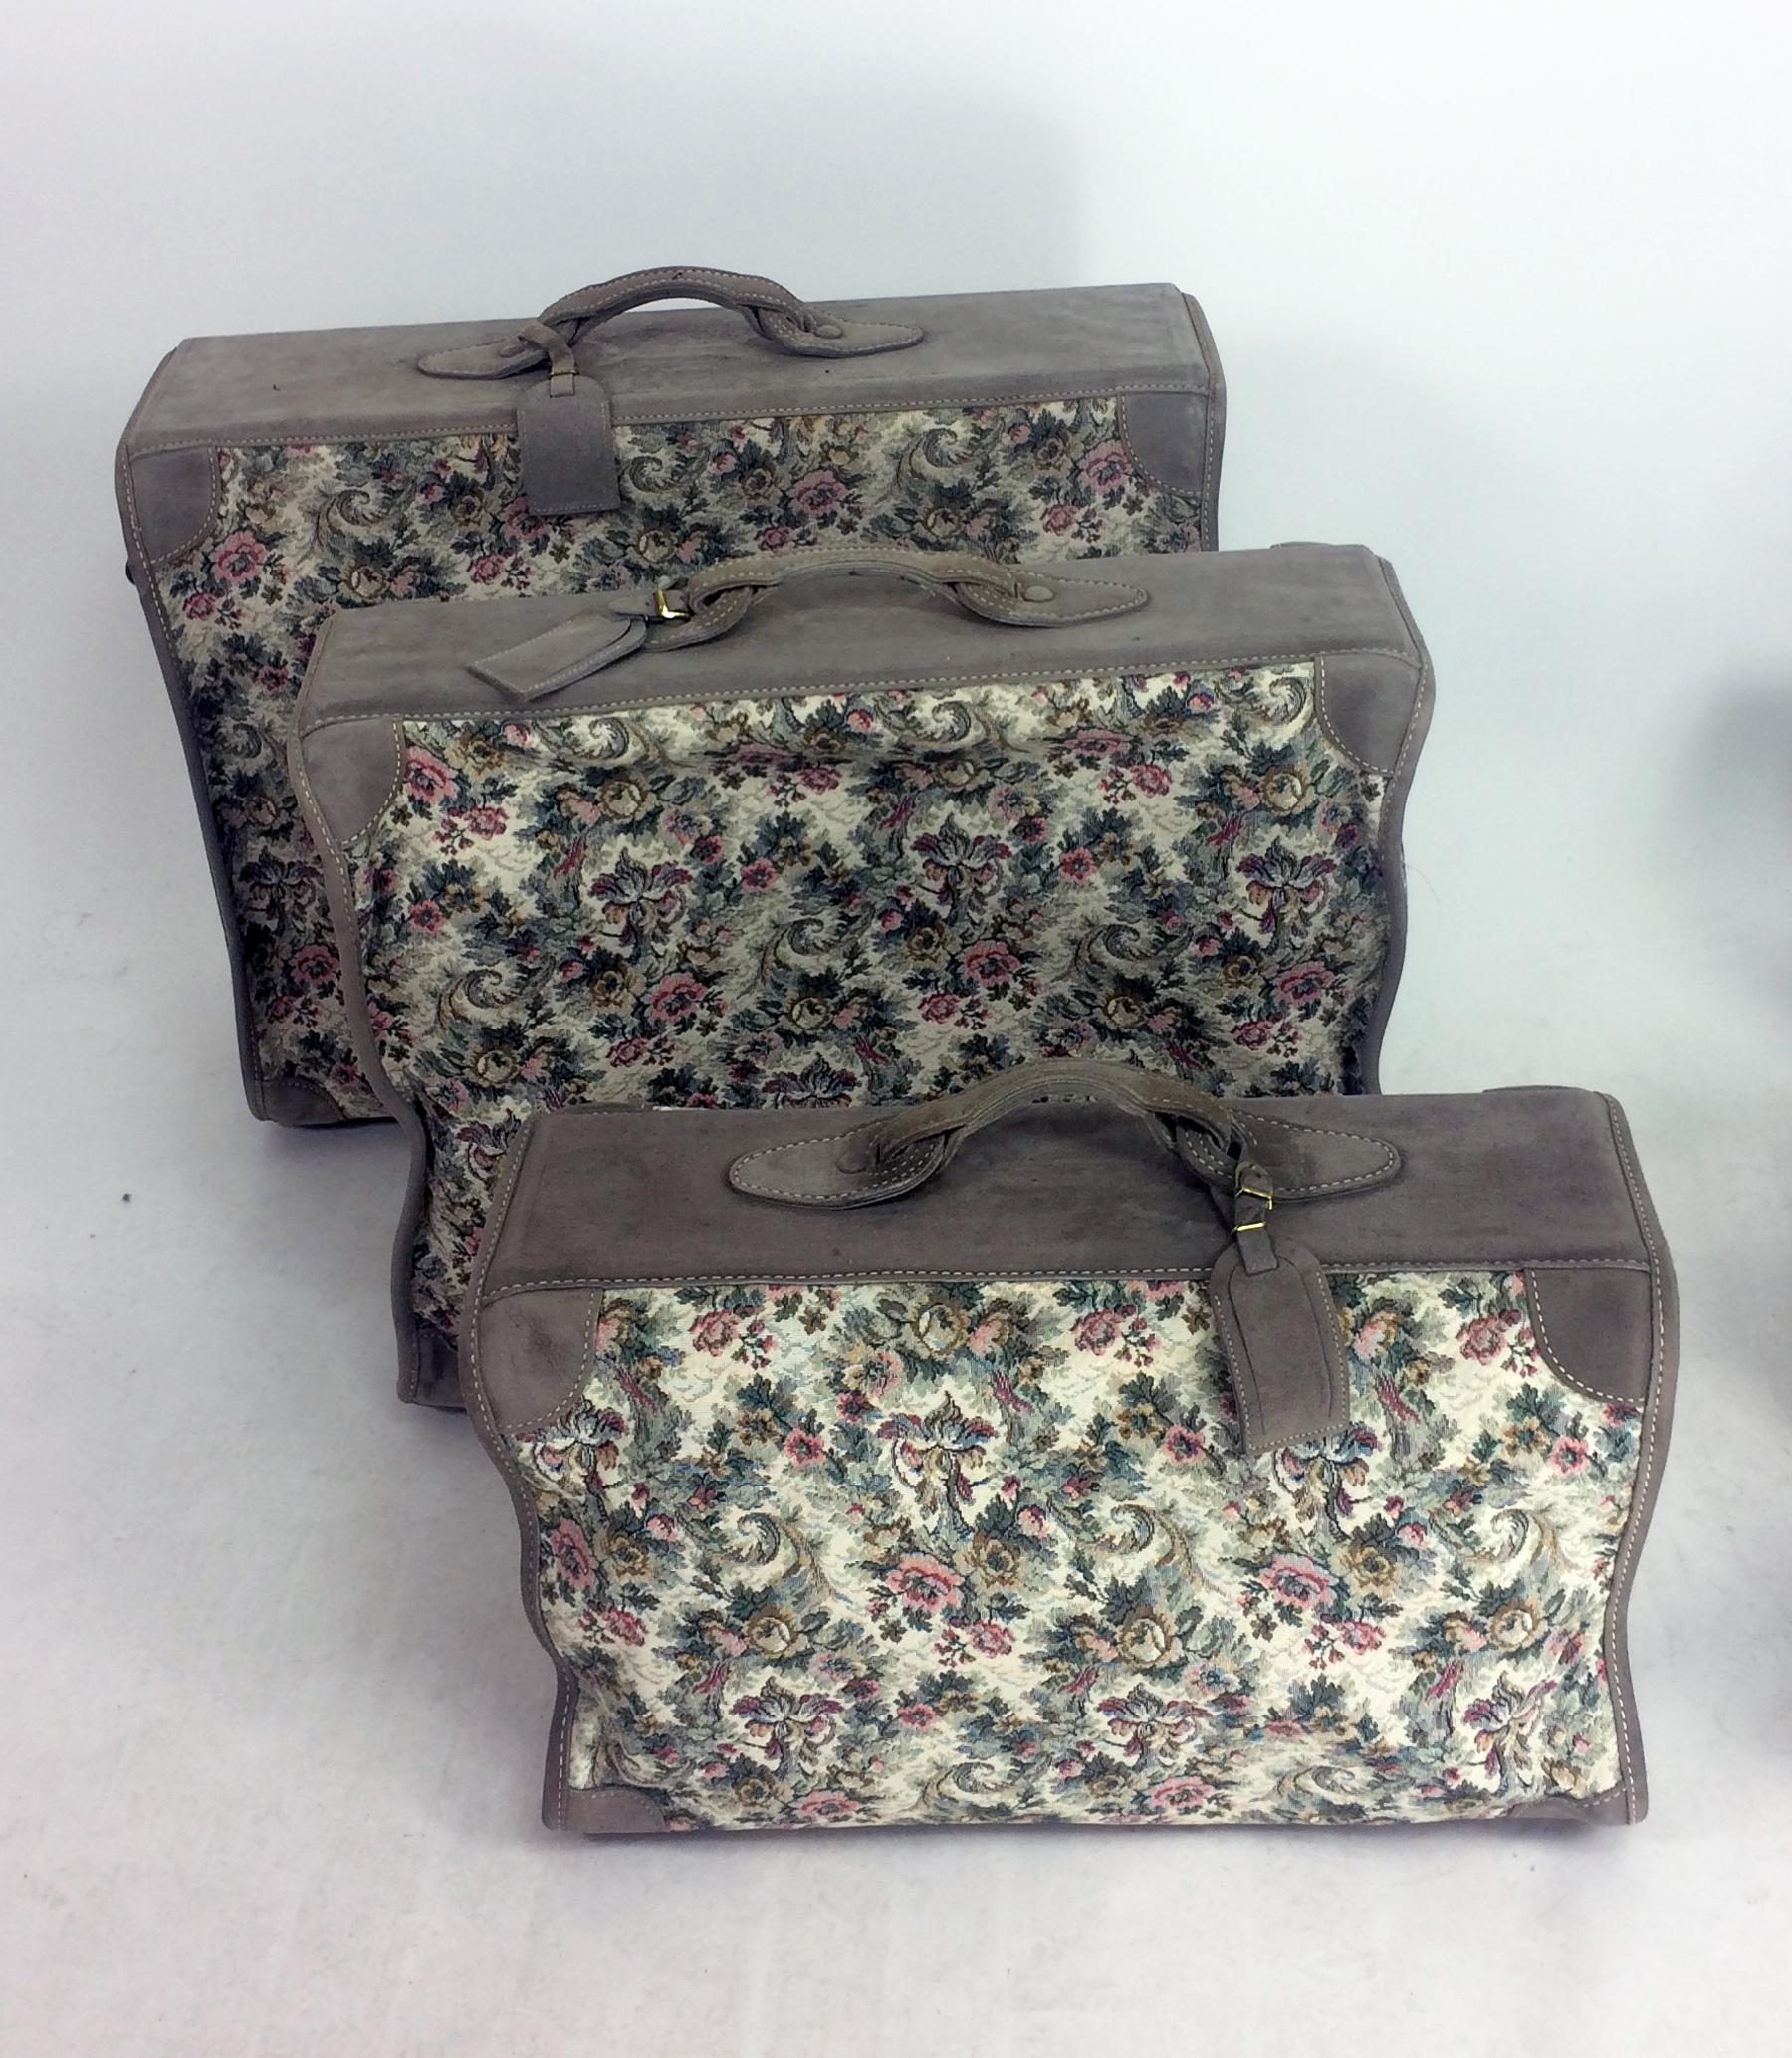 French Luggage Co. Floral Tapestry and suede Six Piece Luggage Set from the 1988. This six piece set of luggage is made by French of California, America's finest handcrafted luggage. Beautiful floral tapestry woven fabric in shades of pale grey with